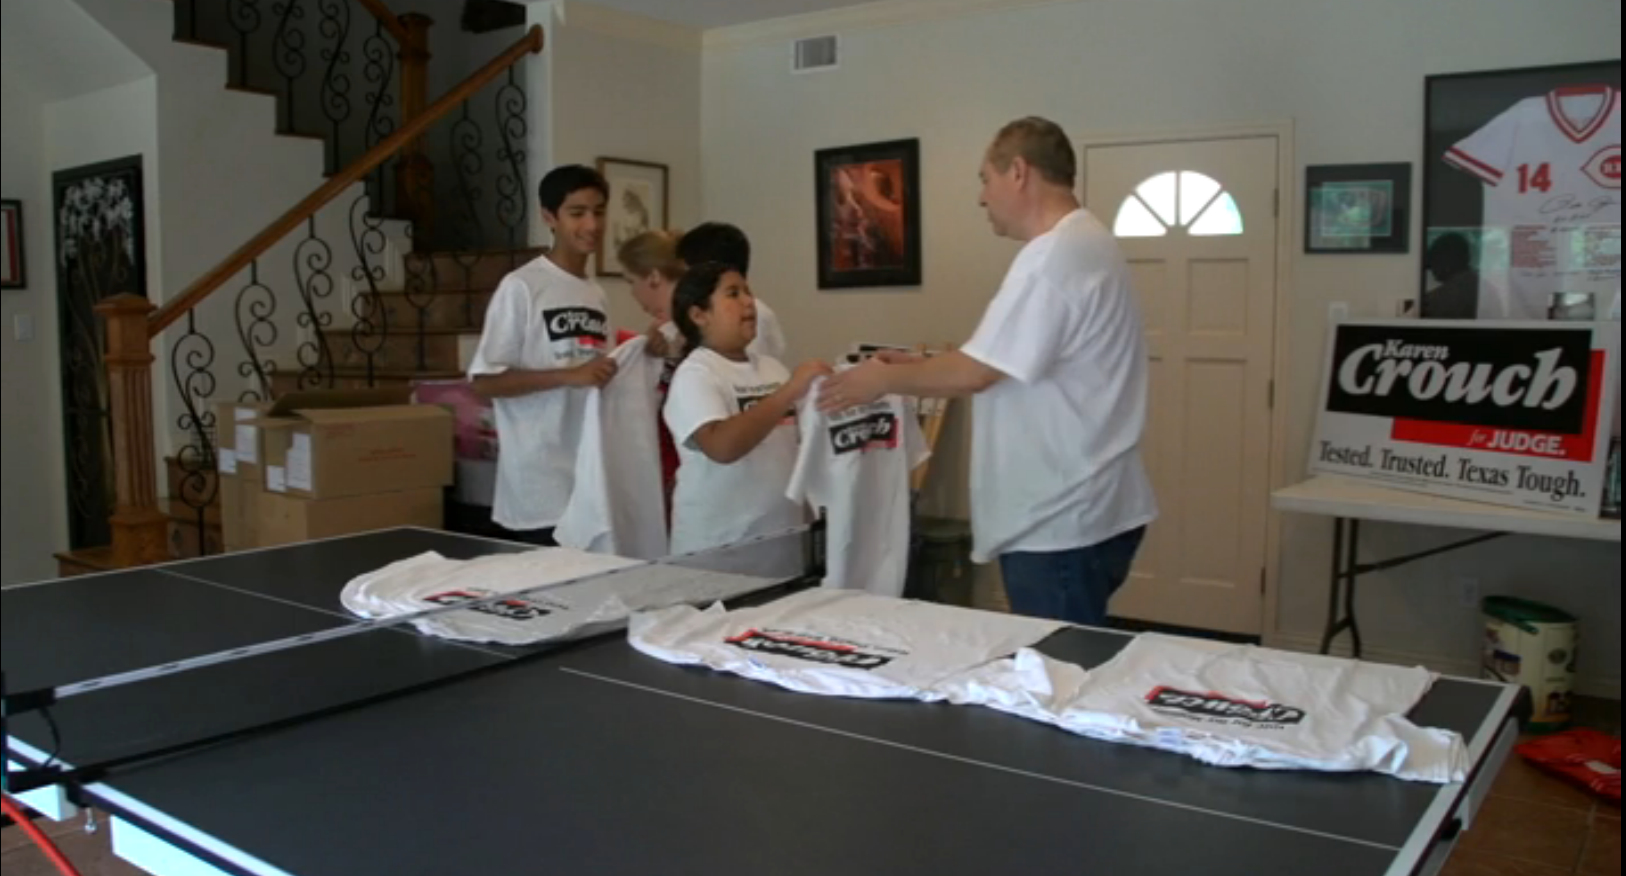 Karen Crouch, her husband Gerald Flores and their children, Gerald, Nicholas and Lillianna pitch in to sort campaign t-shirts.